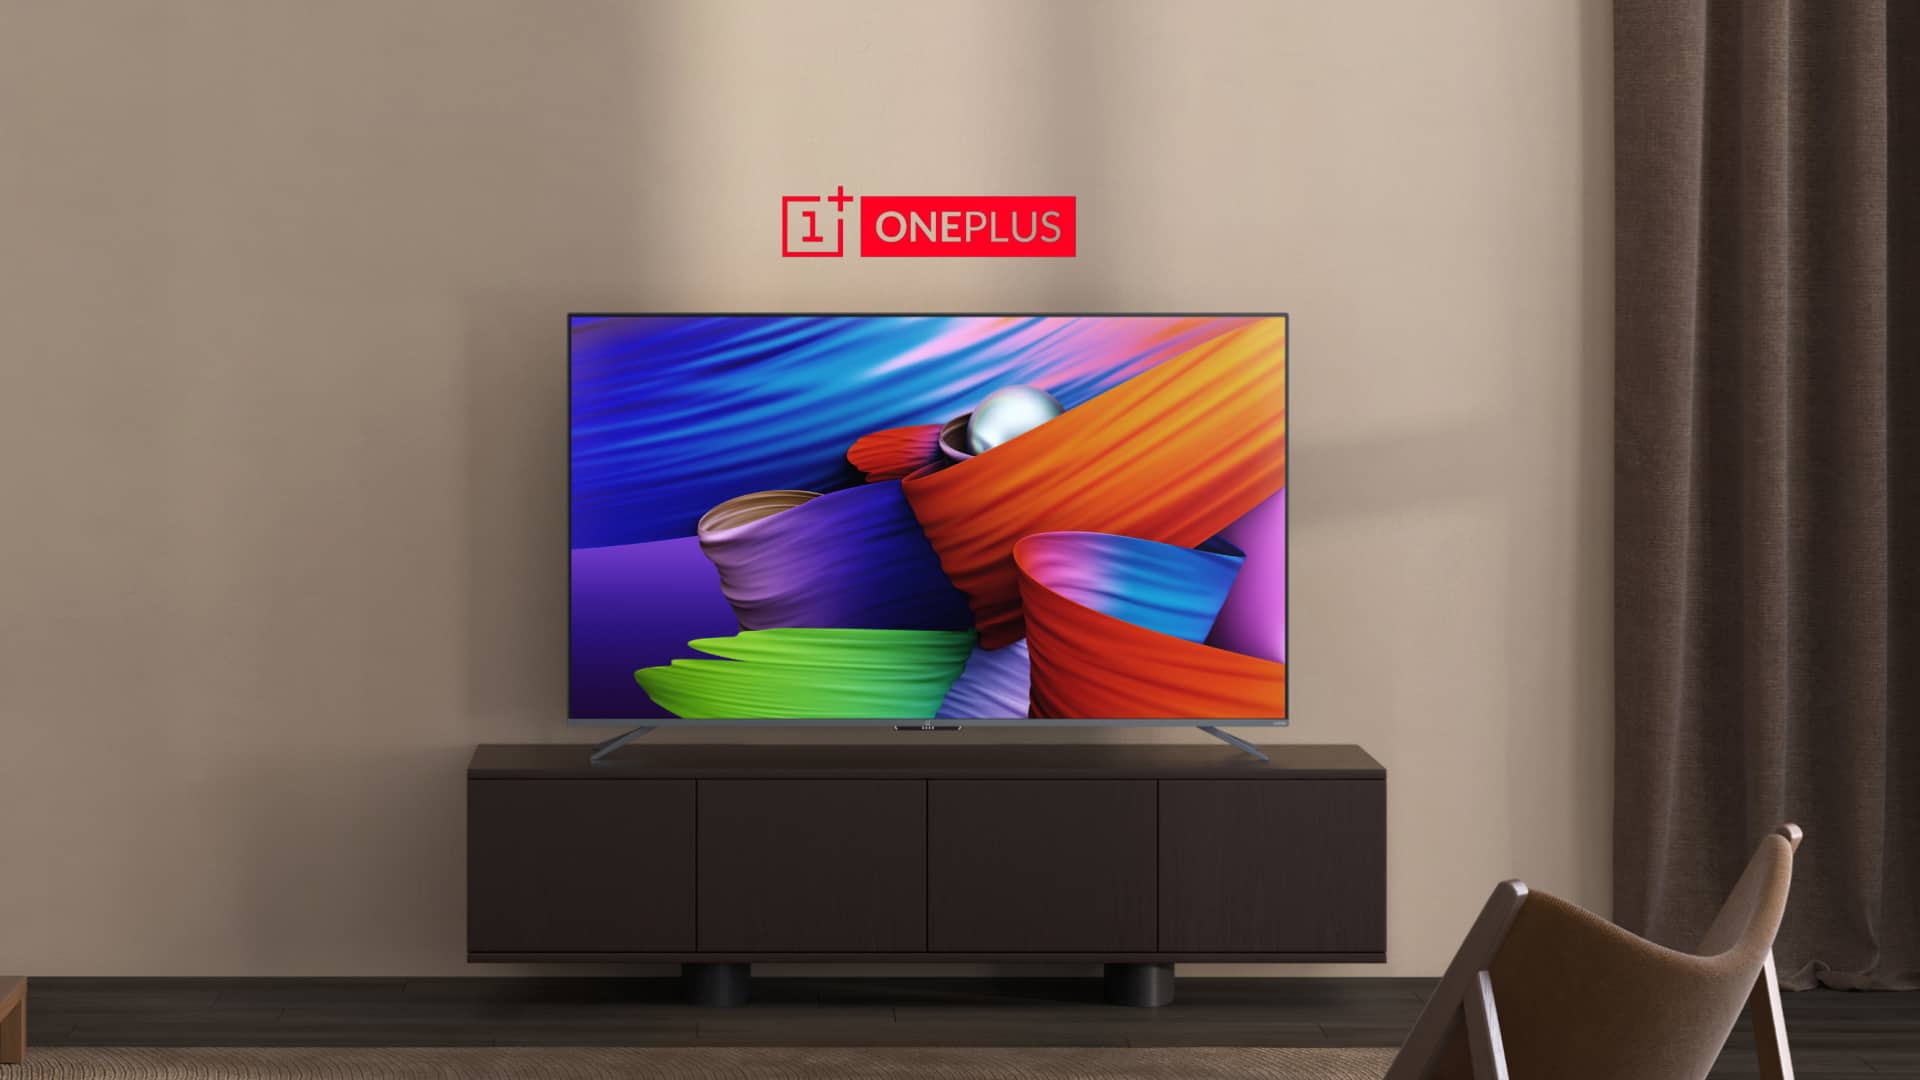 Is OnePlus planning to withdraw from Indian smart TV market?